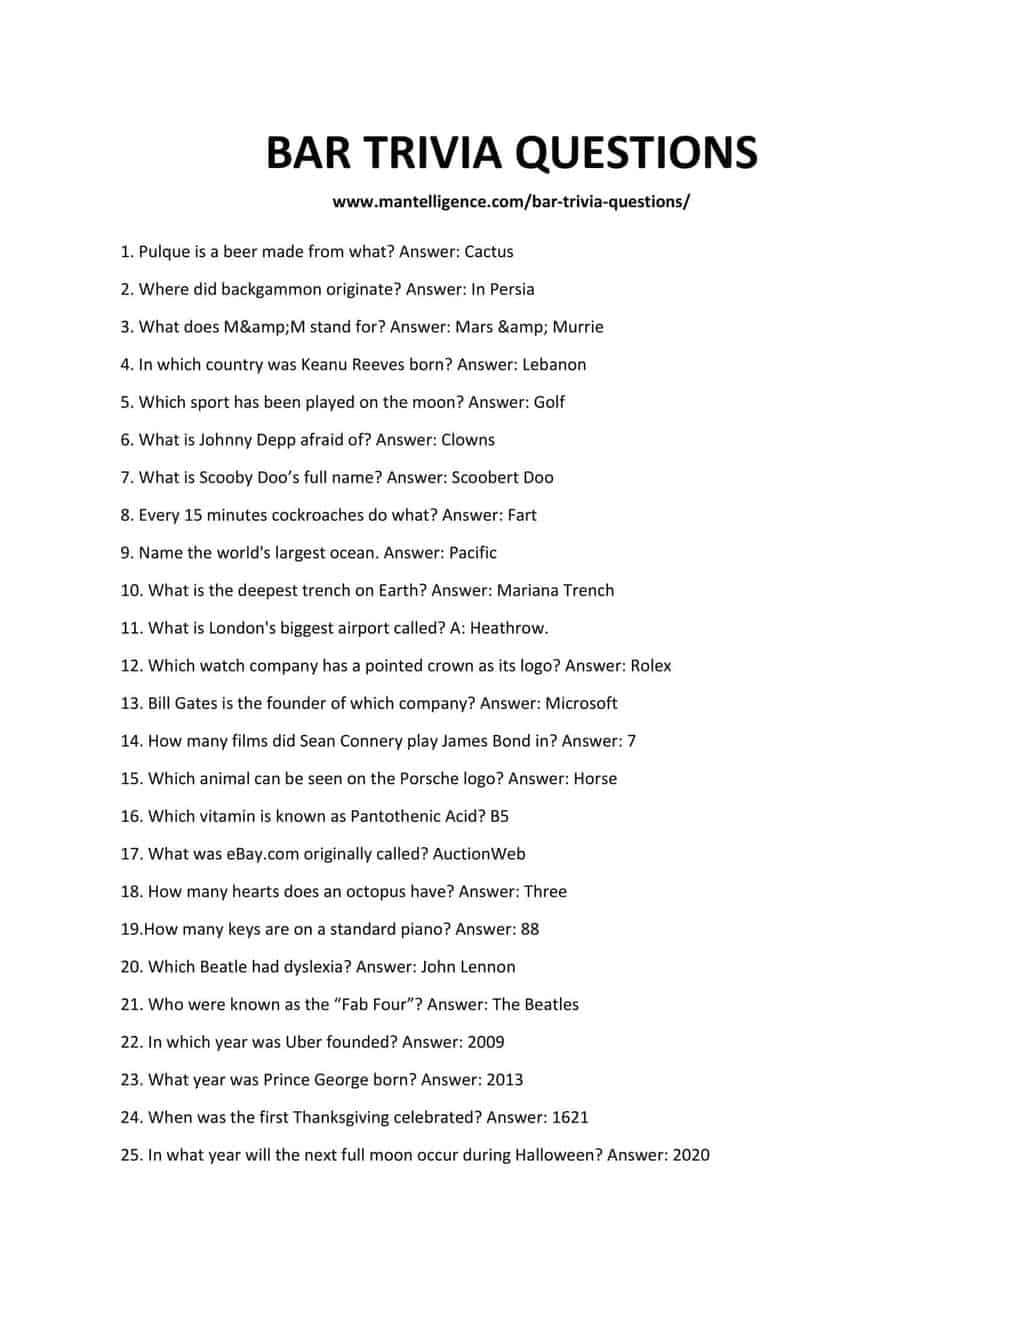 Top 103 Tie Breaker Questions & Answers for Pub Quiz - Twinfluence